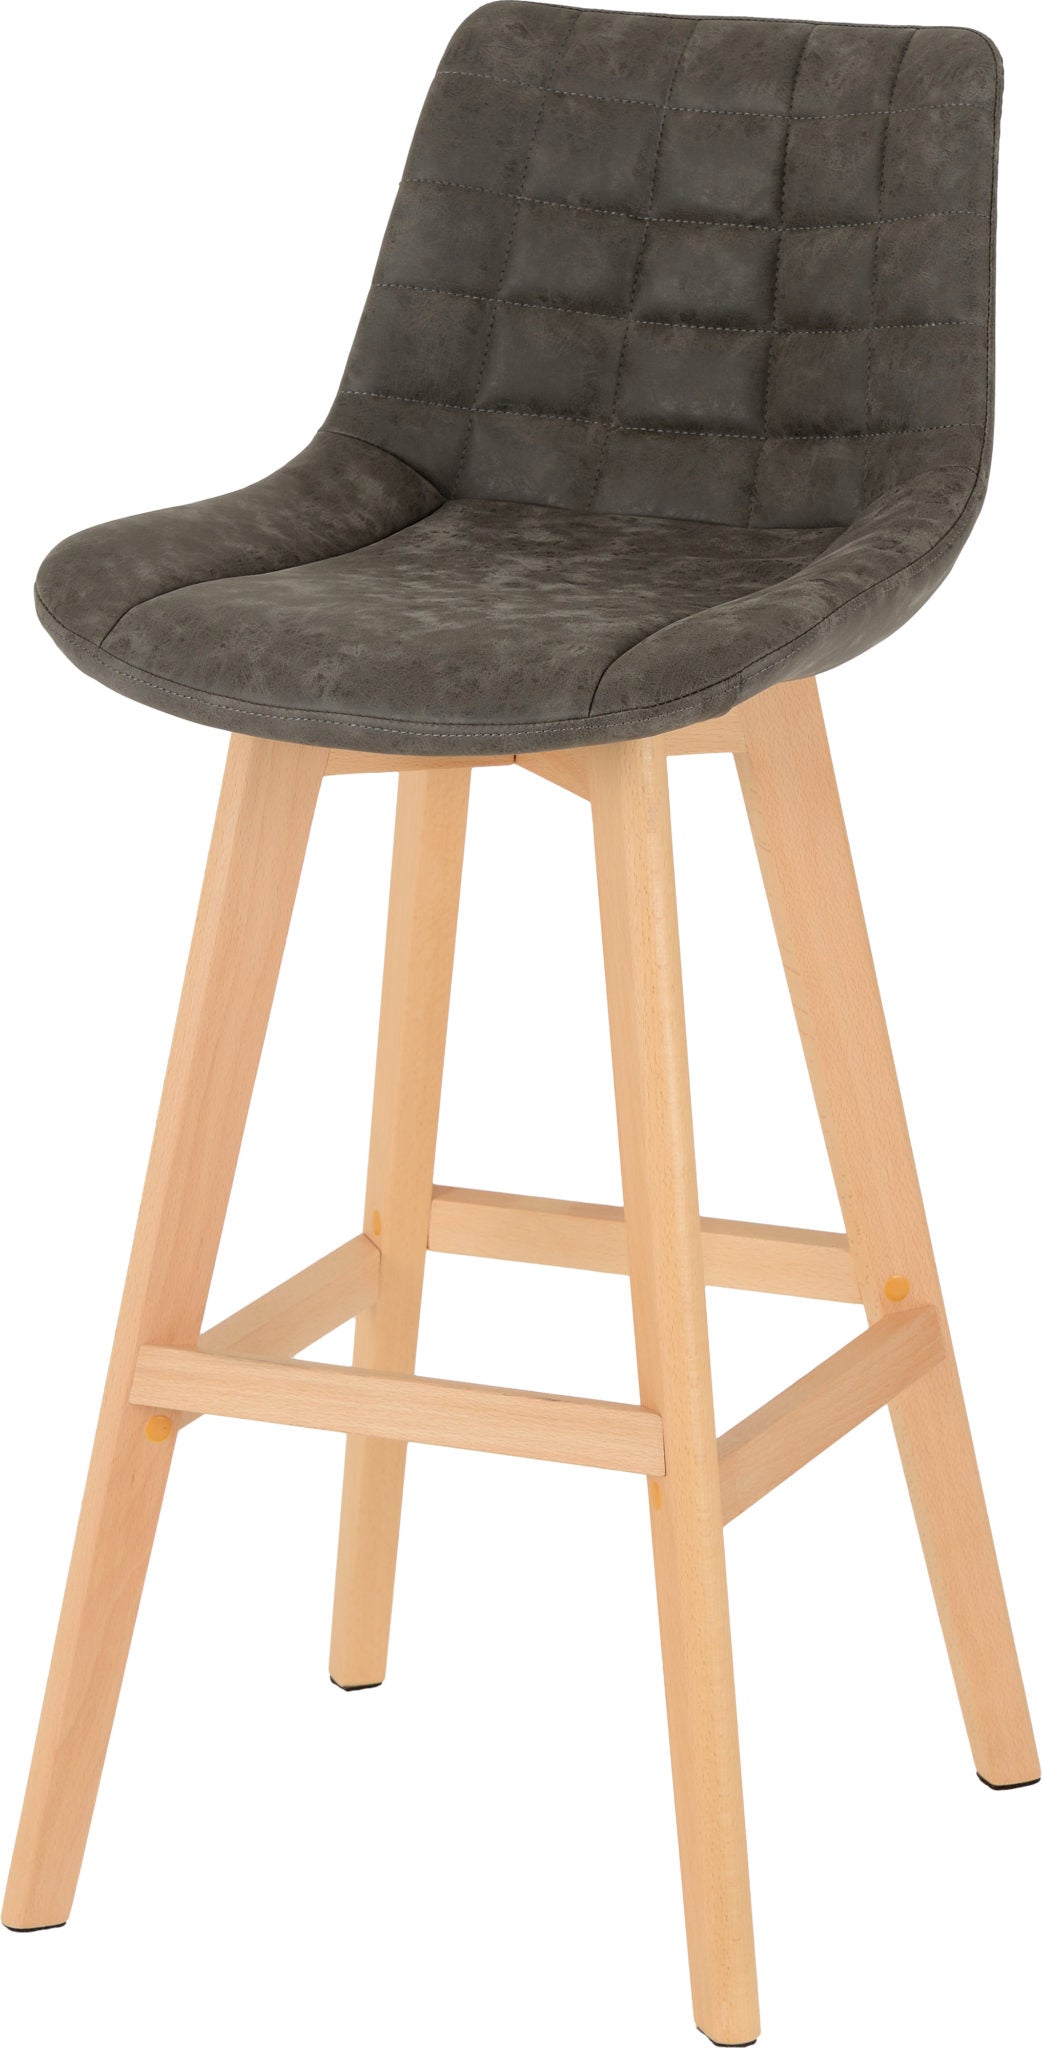 Brisbane Bar Chair  Grey Faux Leather- The Right Buy Store